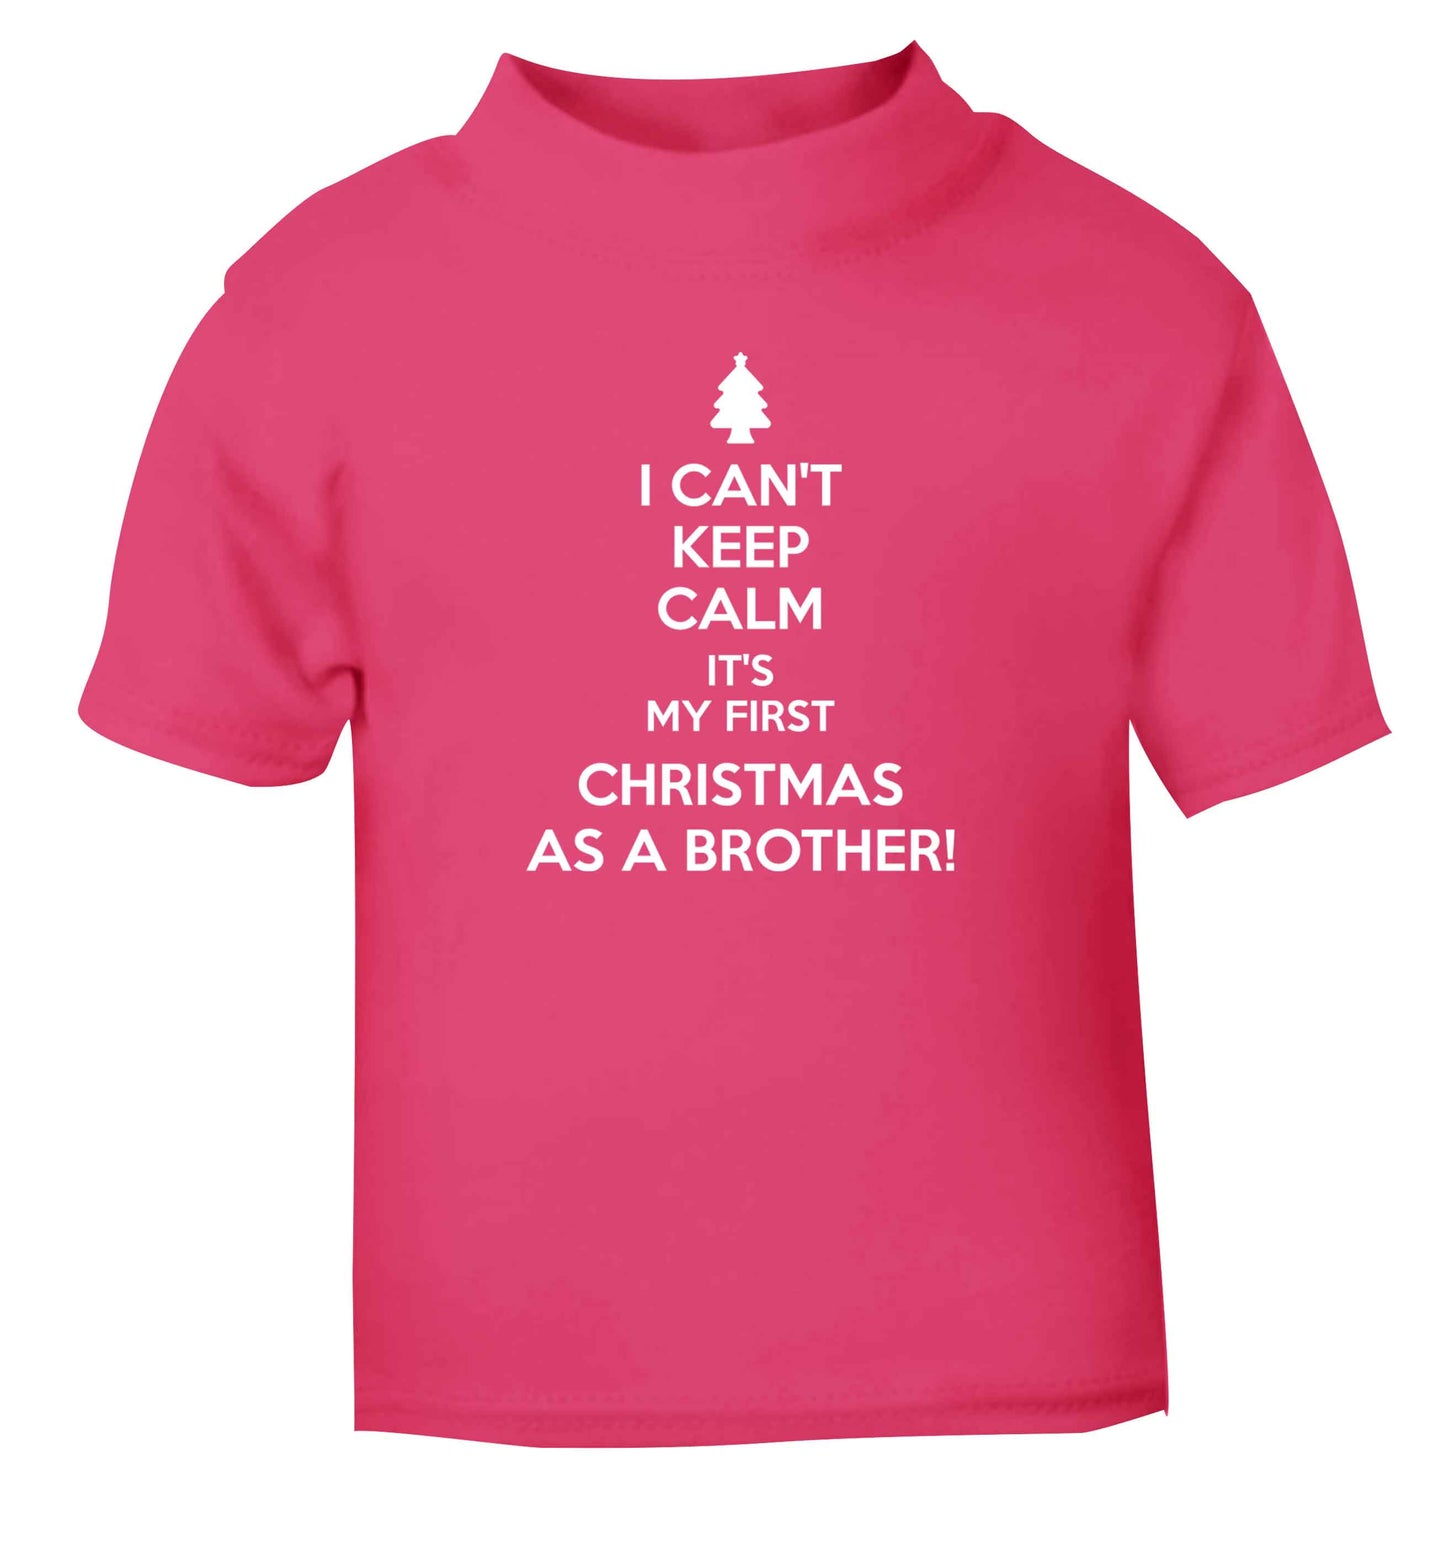 I can't keep calm it's my first Christmas as a brother! pink Baby Toddler Tshirt 2 Years